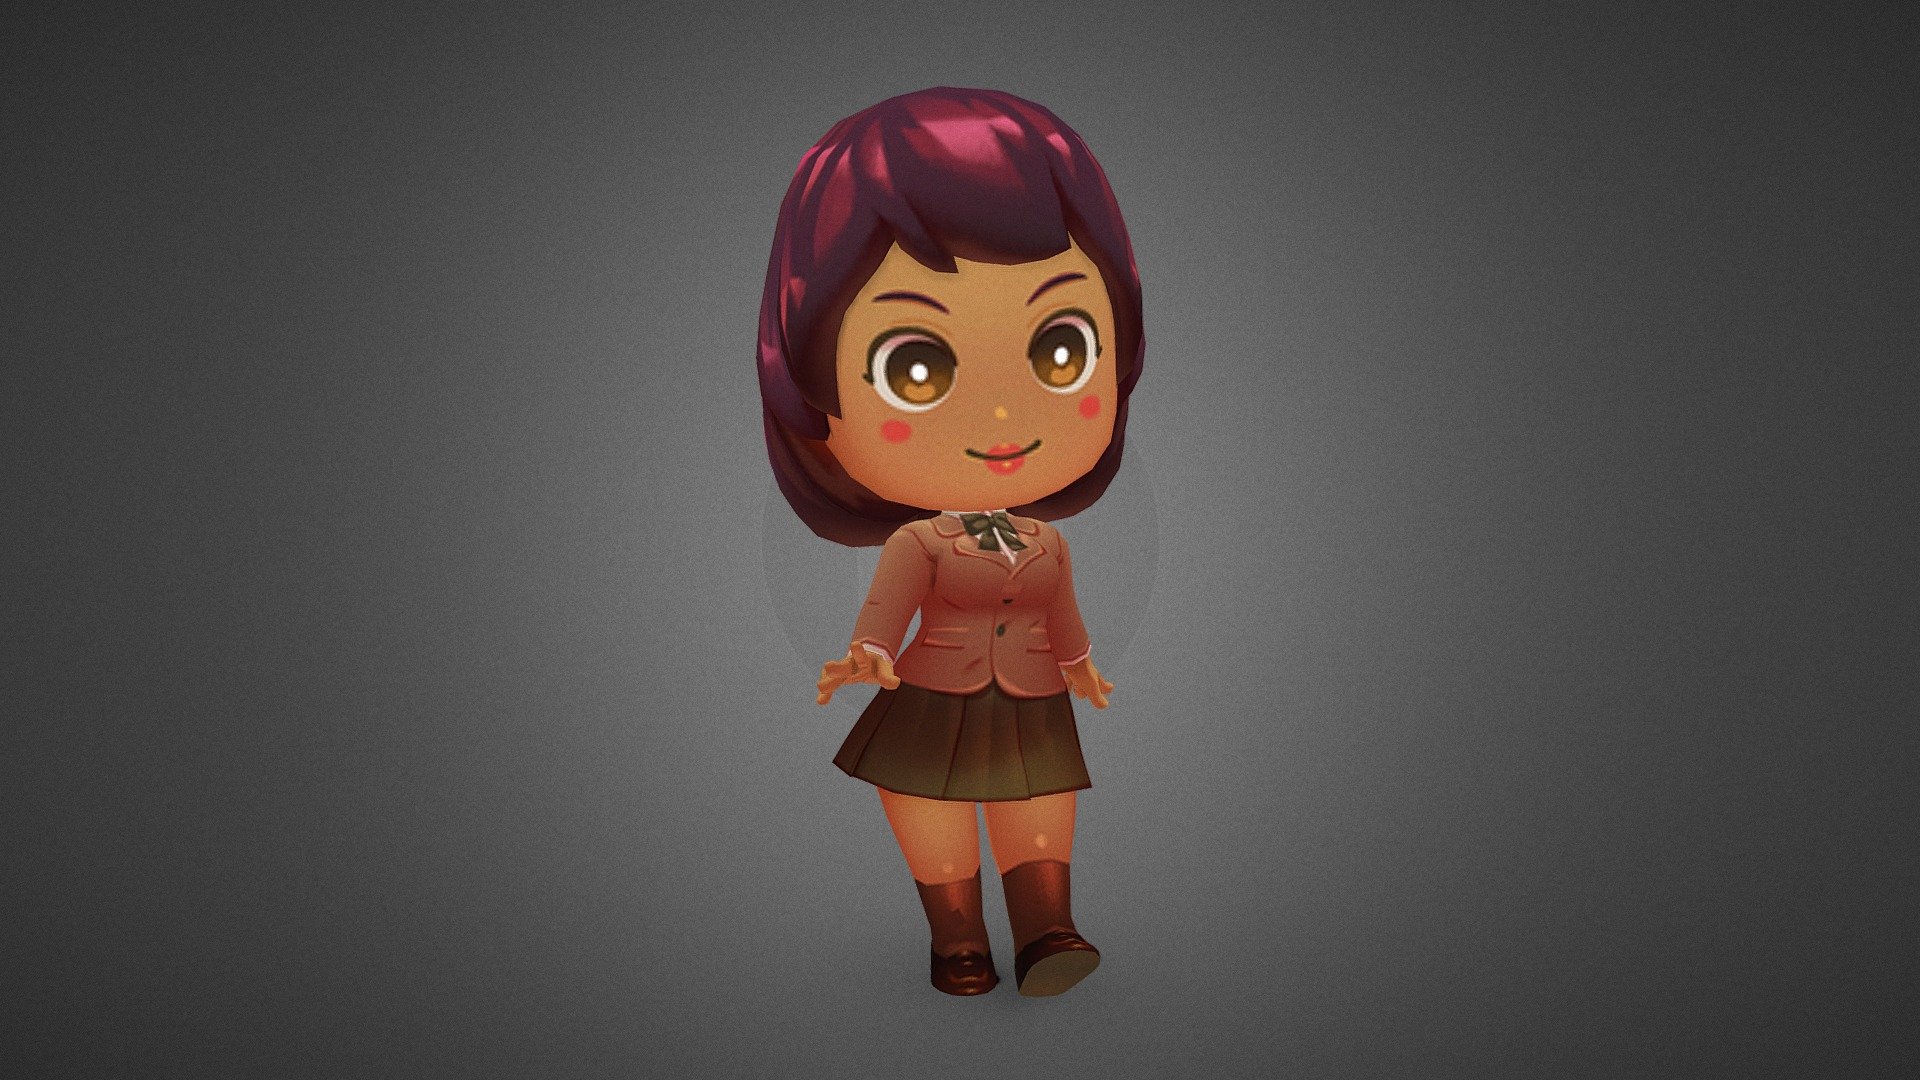 A character in adorable chibi style. Focus on building the storytelling or developing the gameplay for your project. The character is here!

The additional files are compressed into a single RAR archive. This package includes a total of one (1x) rigged low poly 3D character (T-Pose) in FBX and MA formats, and a high resolution hand painted texture (2048 x 2048 px 3d model